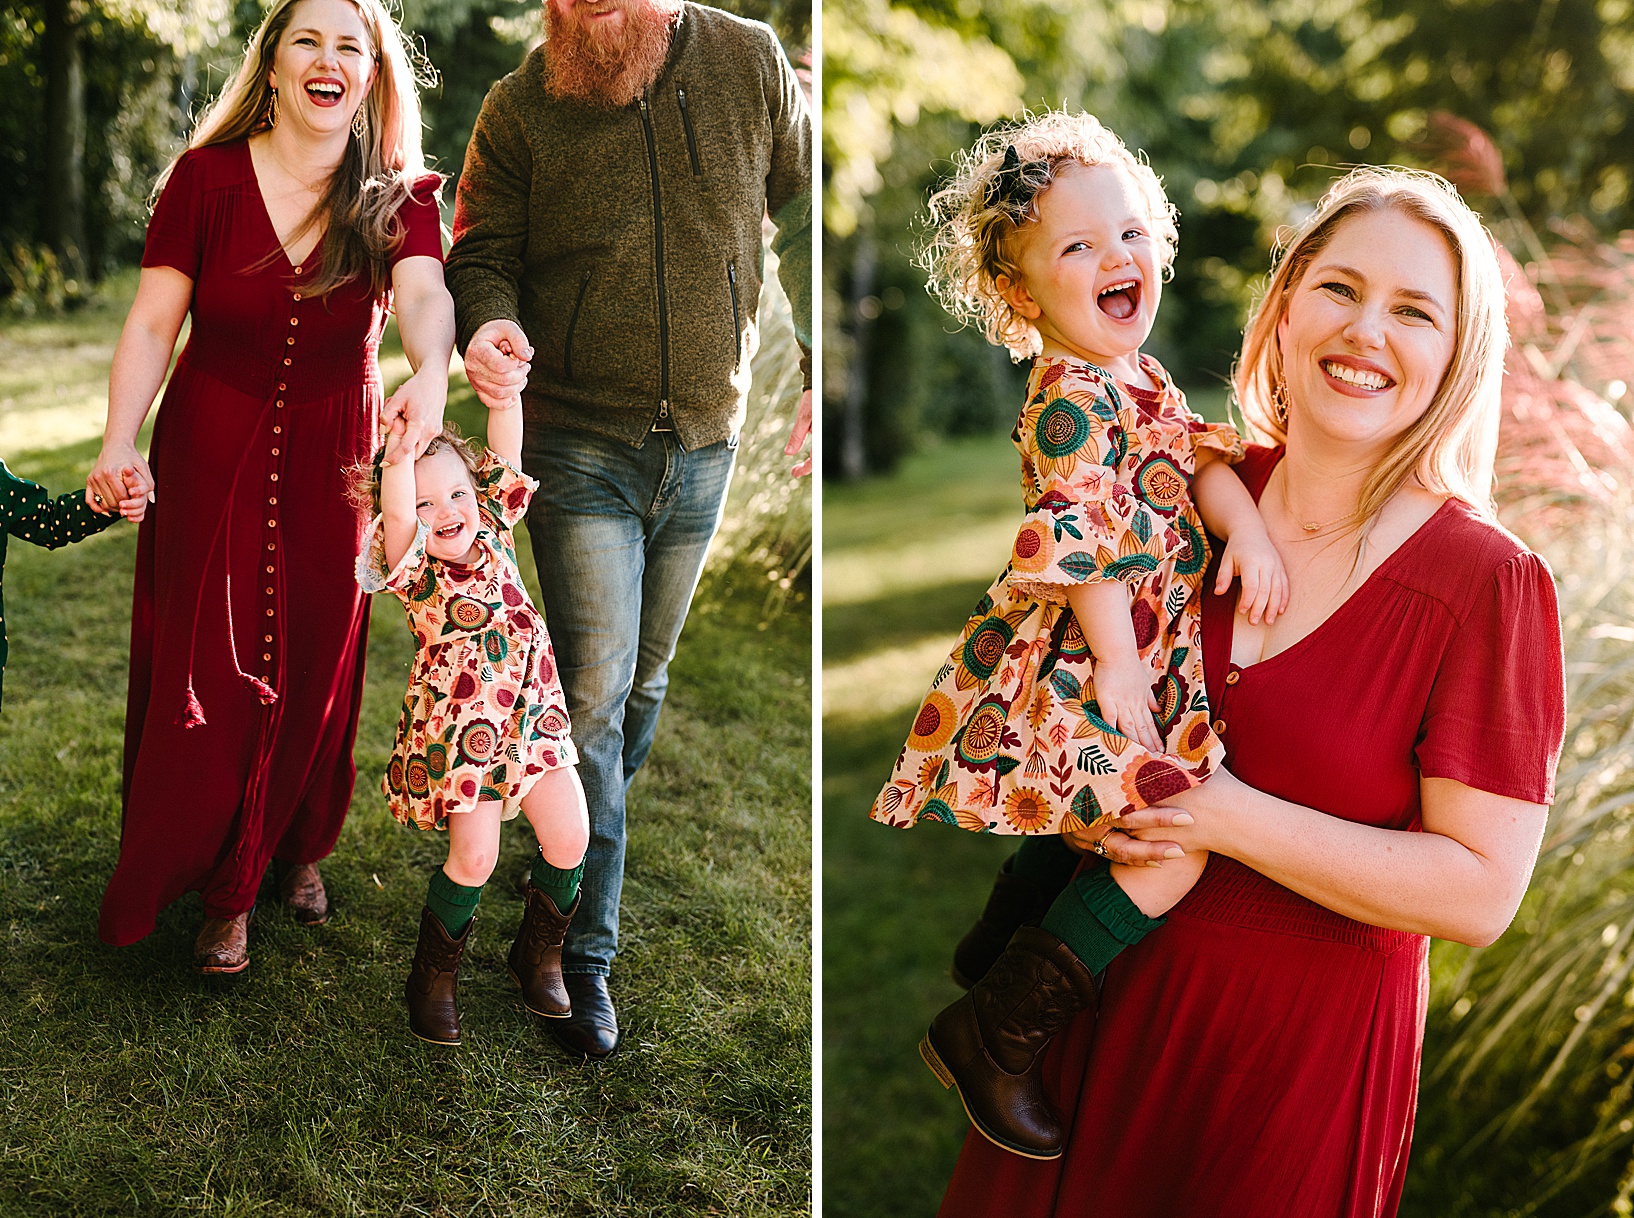 Blonde woman in red floor length dress and red-bearded man swing their toddler daughter between them during fall family session